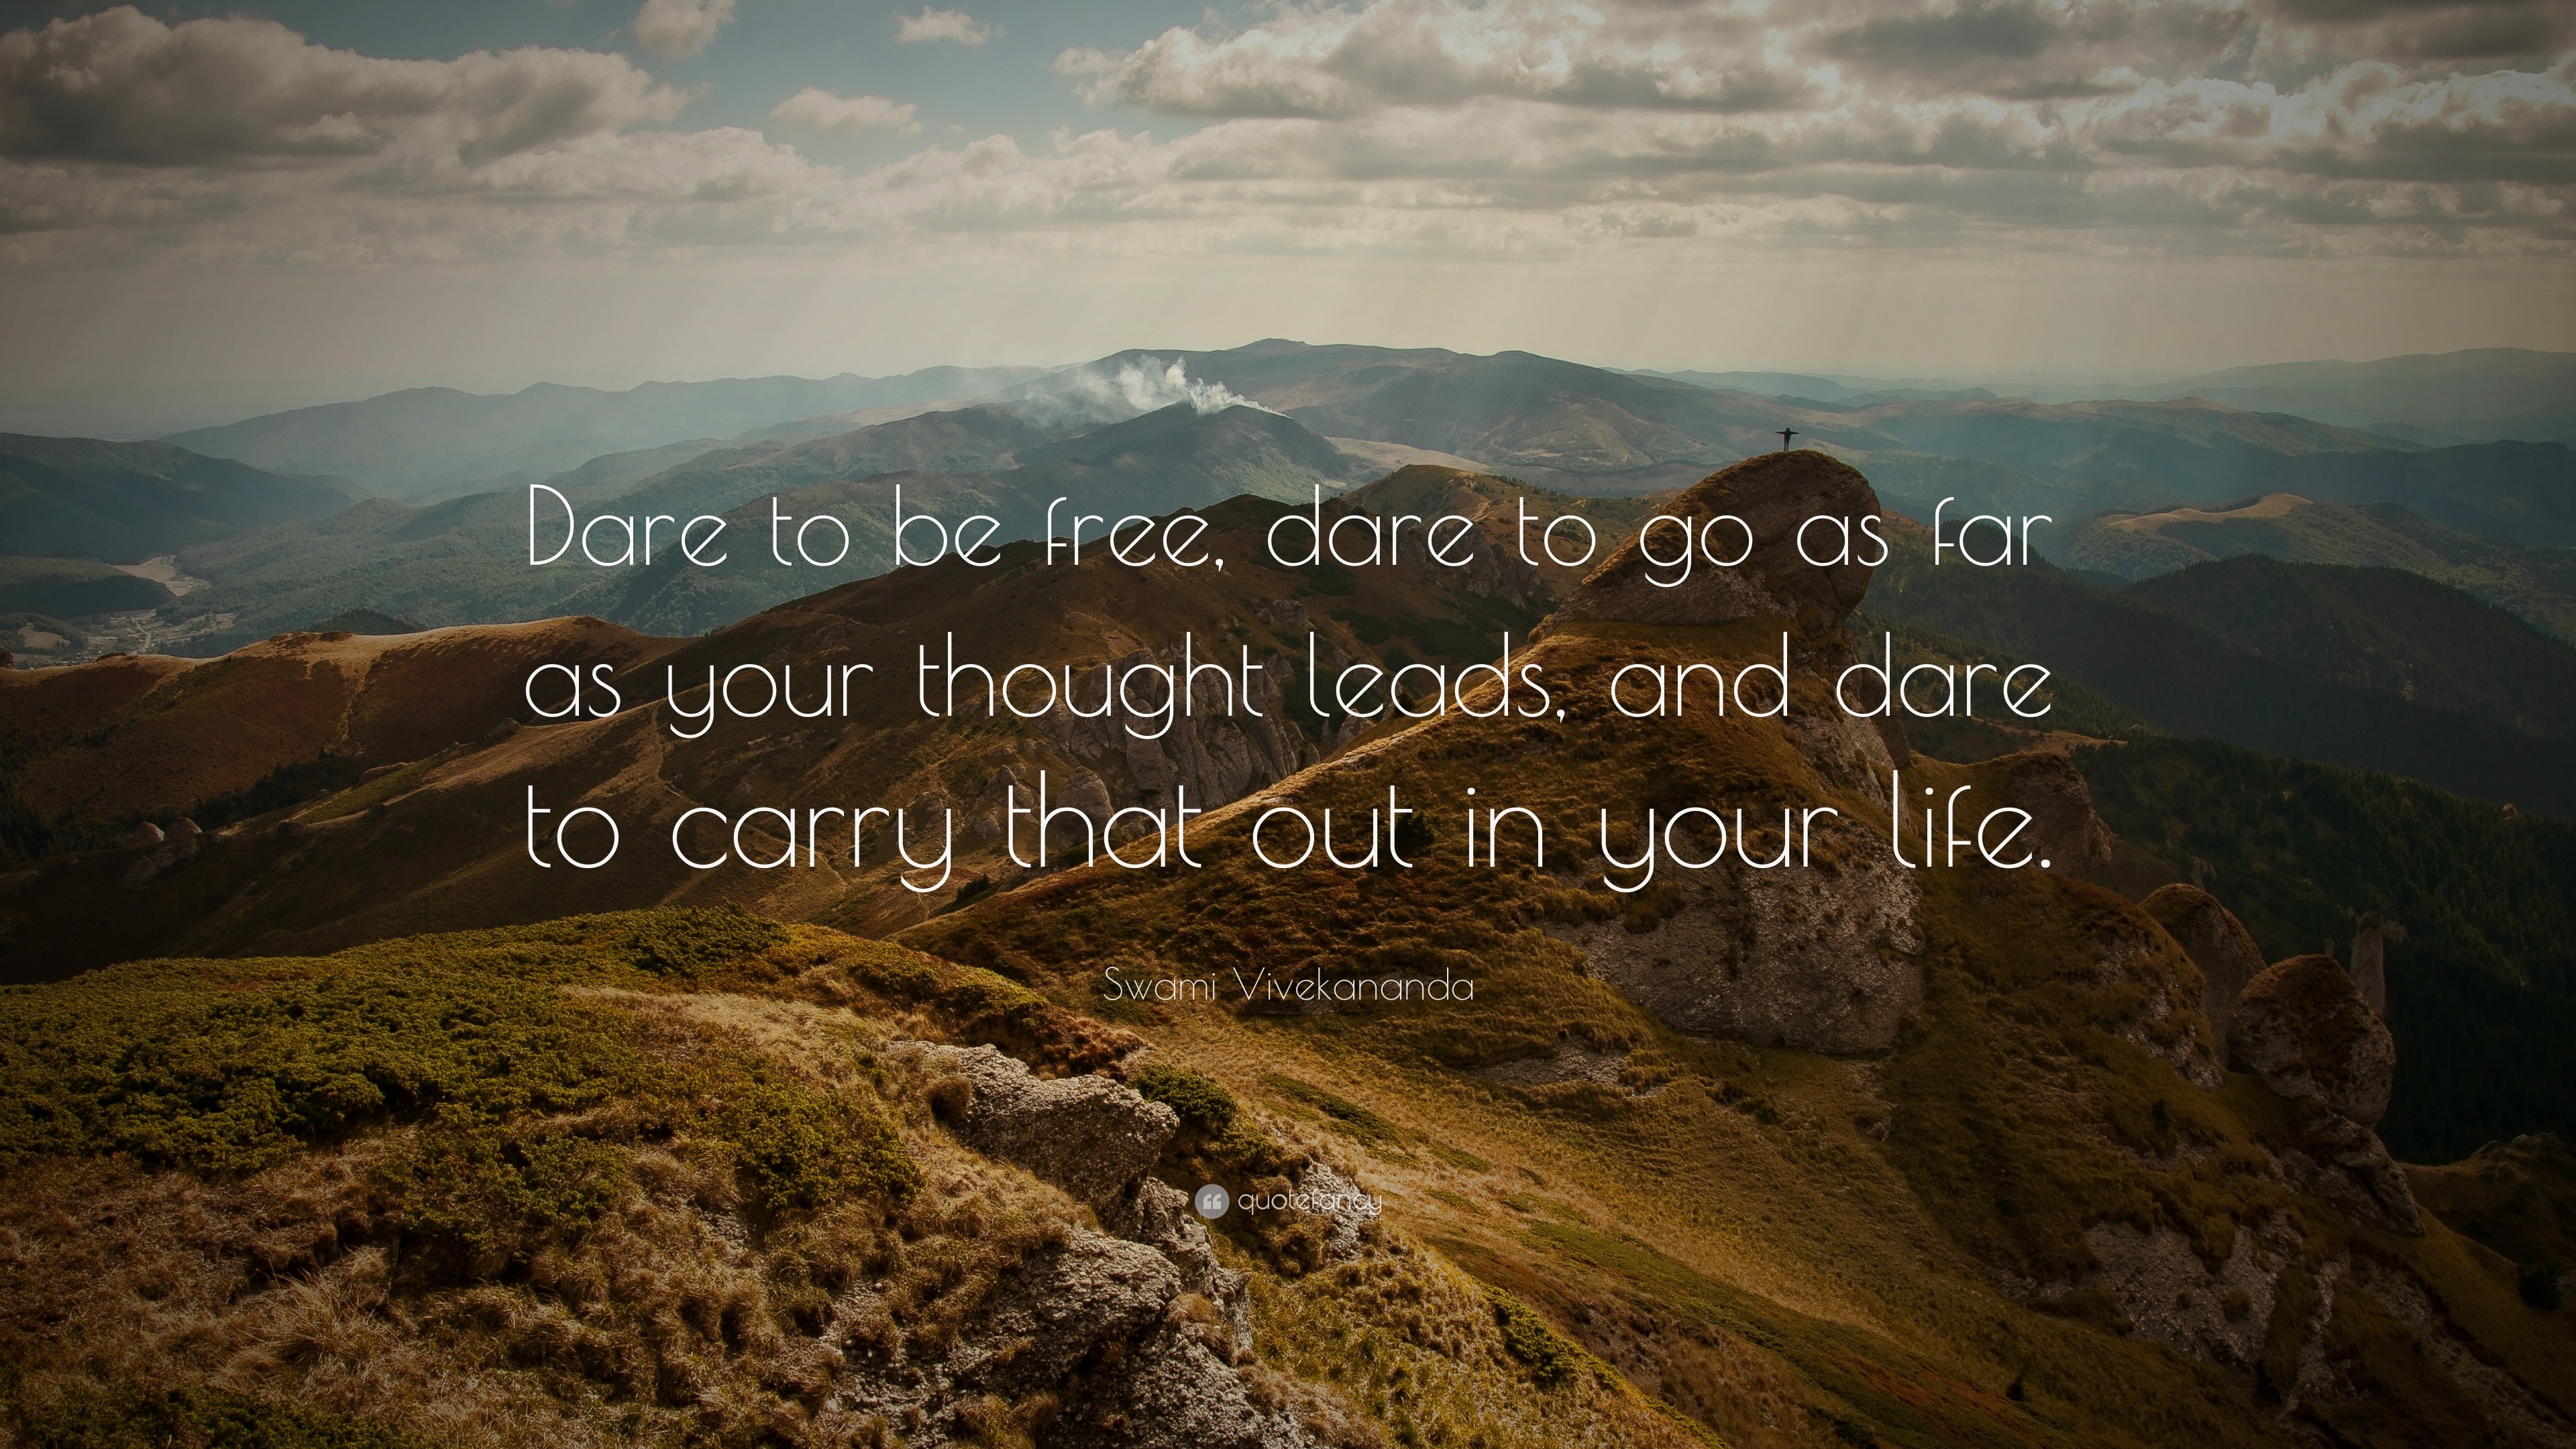 Swami Vivekananda Quote Dare To Be Free Dare To Go As Far As Your Thought Leads And Dare To Carry That Out In Your Life 19 Wallpapers Quotefancy